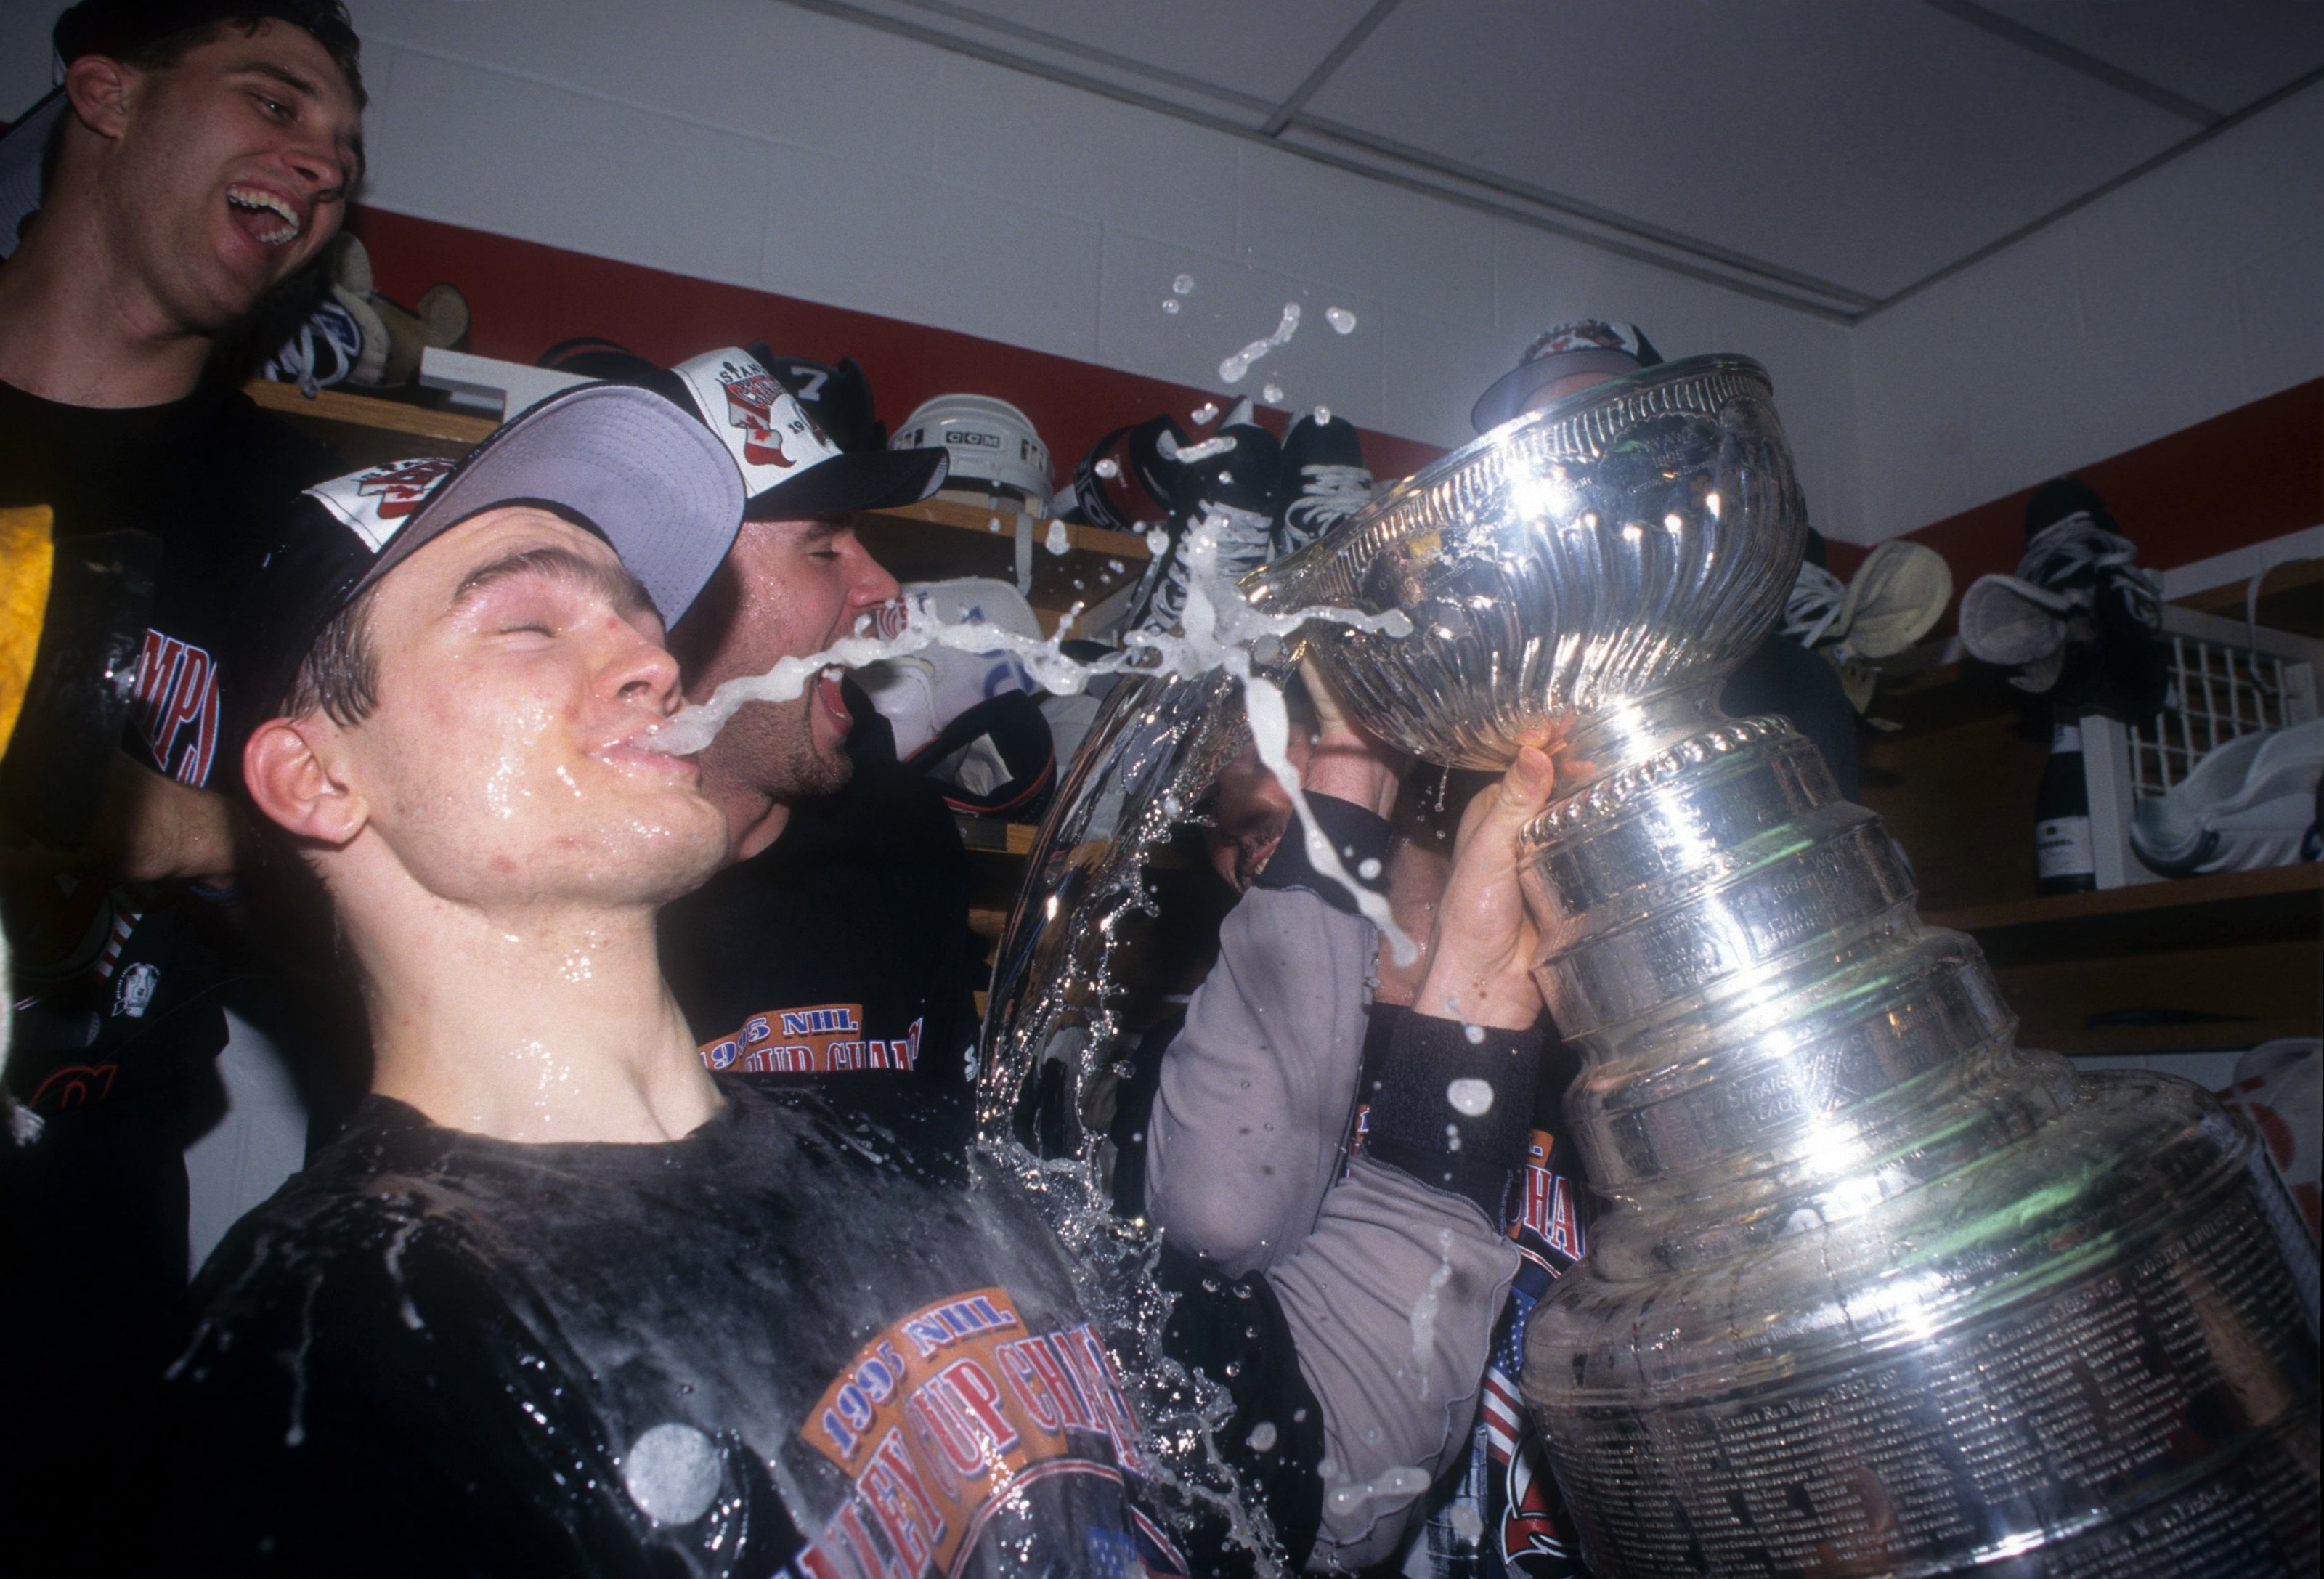 On this day in 1995 the New Jersey Devils won their first Stanley